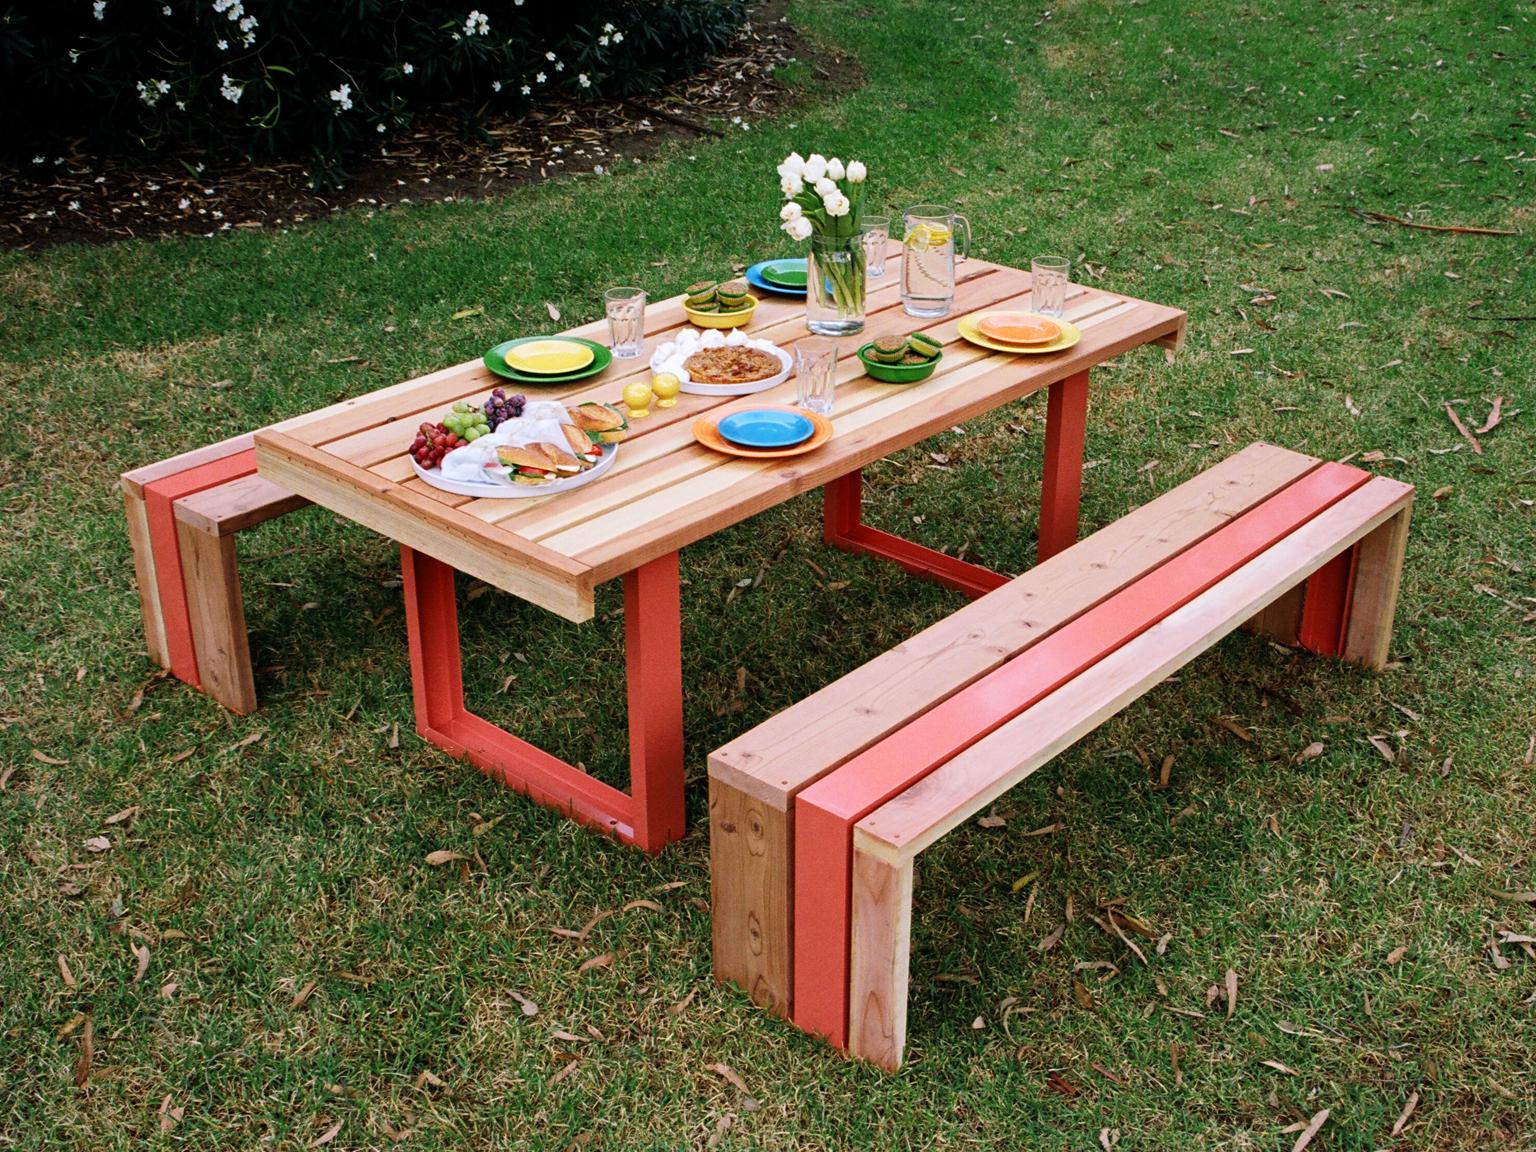 Contemporary Picnic Table / Dining Set - Redwood In New Condition For Sale In San Pedro, CA